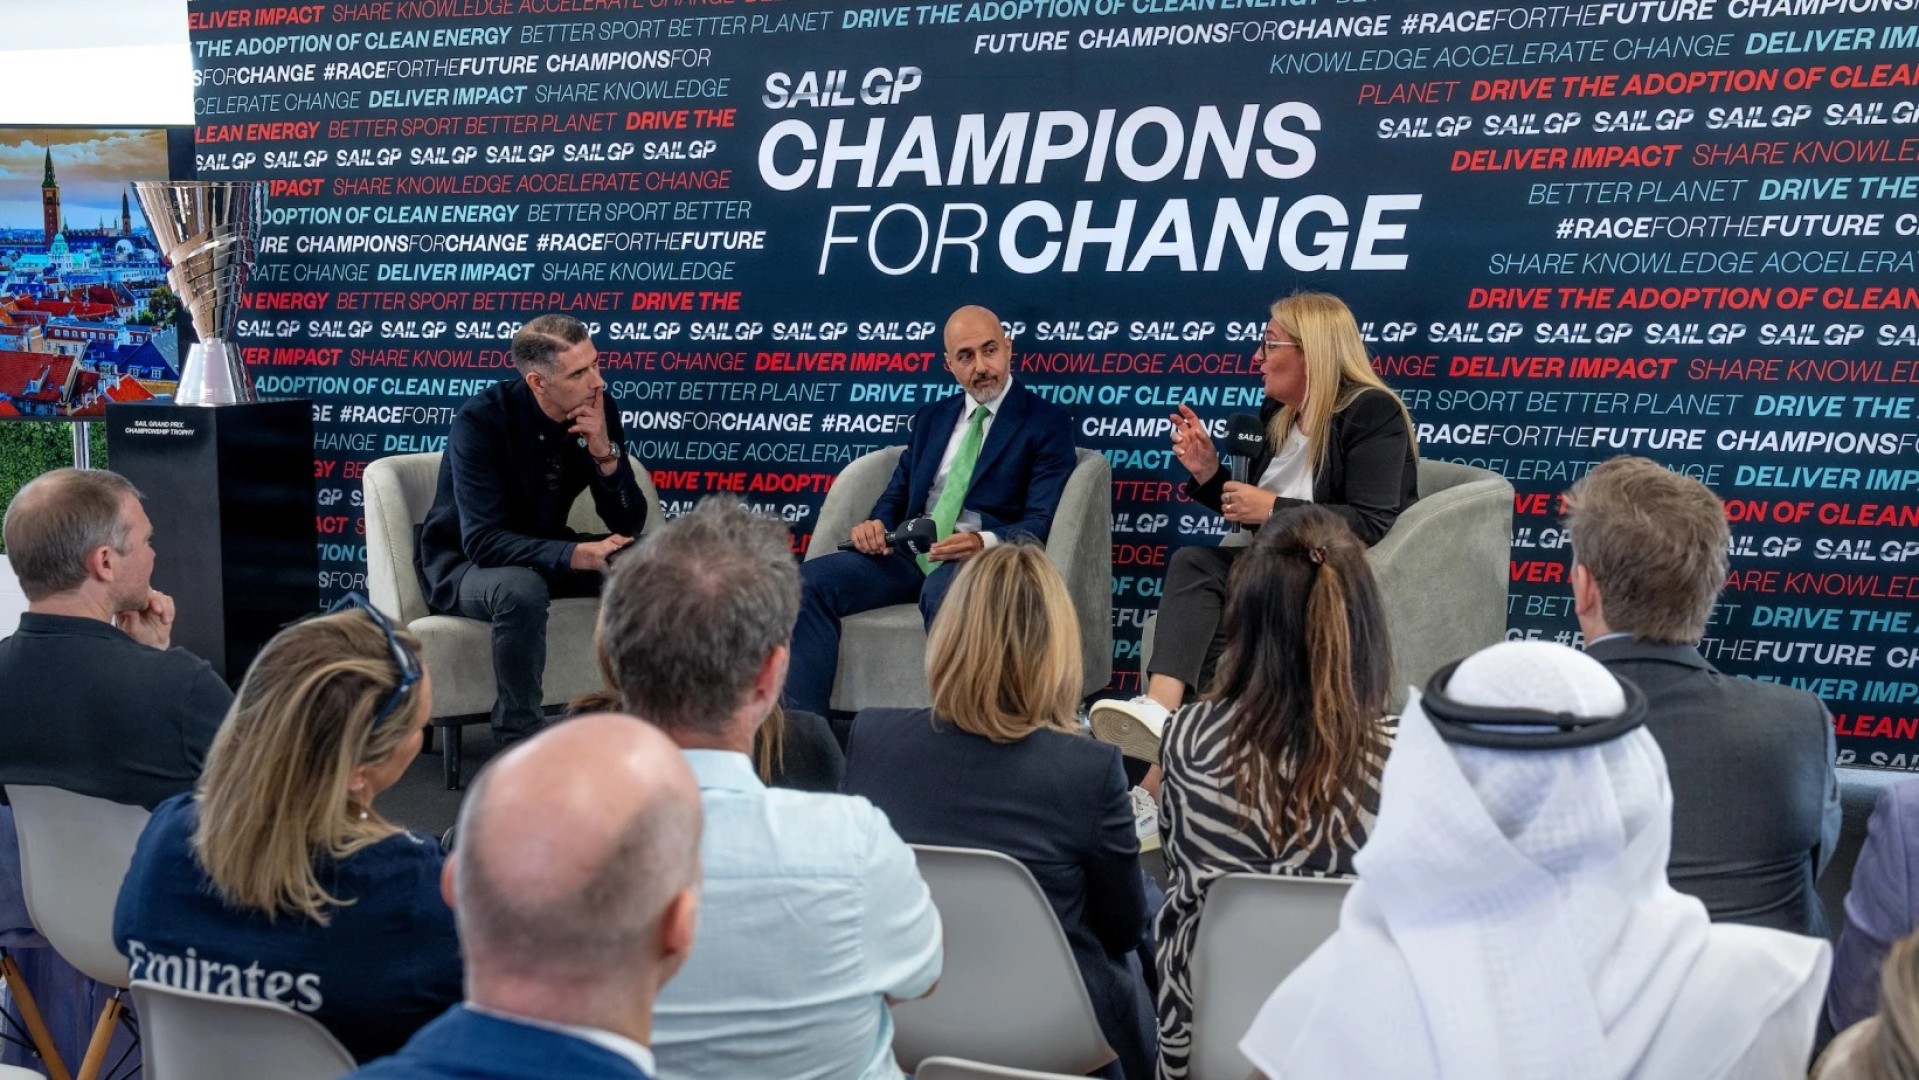 Inside Abu Dhabi's Champions for change event